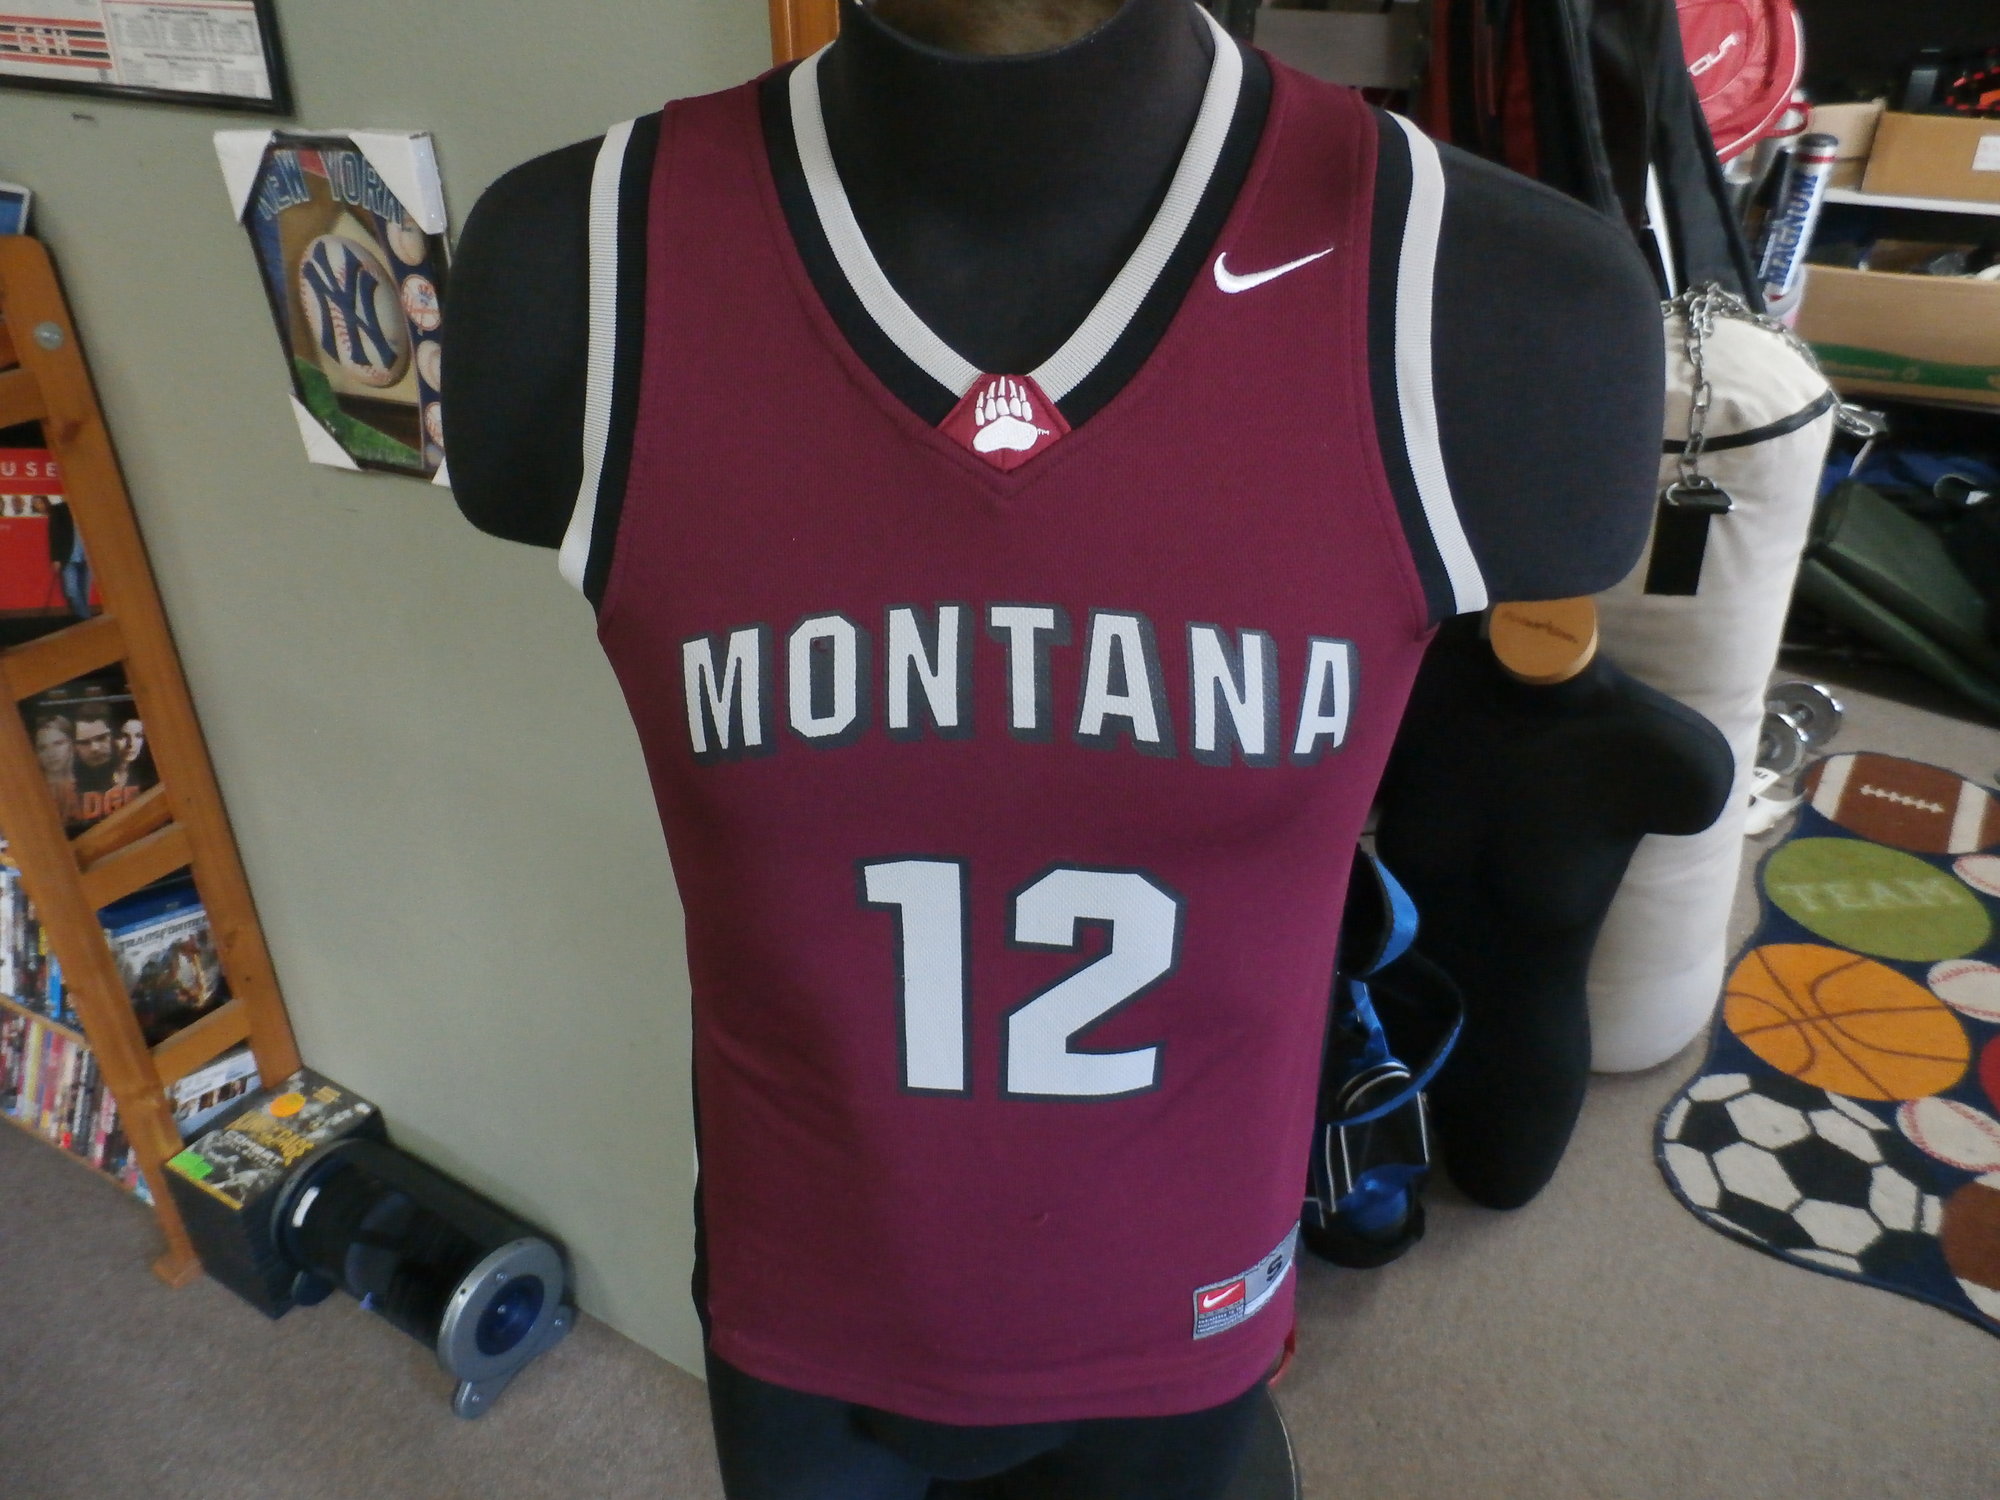 Montana Grizzlies Nike men's tank top Maroon size small #22839
Rating: (see below) 3- Good Condition
Team: Montana Grizzlies
Player: n/a
Brand: Nike
Size: Small- men's (Measured Flat: chest 17\", length 24\")
Color: Maroon
Style: sleeveless; screen printed
Material: 100% polyester
Condition: 3- Good Condition - some pilling and fuzz; some fading and discoloration; wrinkles; some stretching and wear from washing and wearing; screen printing is worn and faded; small rip in the \"O\" on the front; 3 dark streaks on \"2\" on the back (see photos)
Item #: 22839
Shipping: FREE